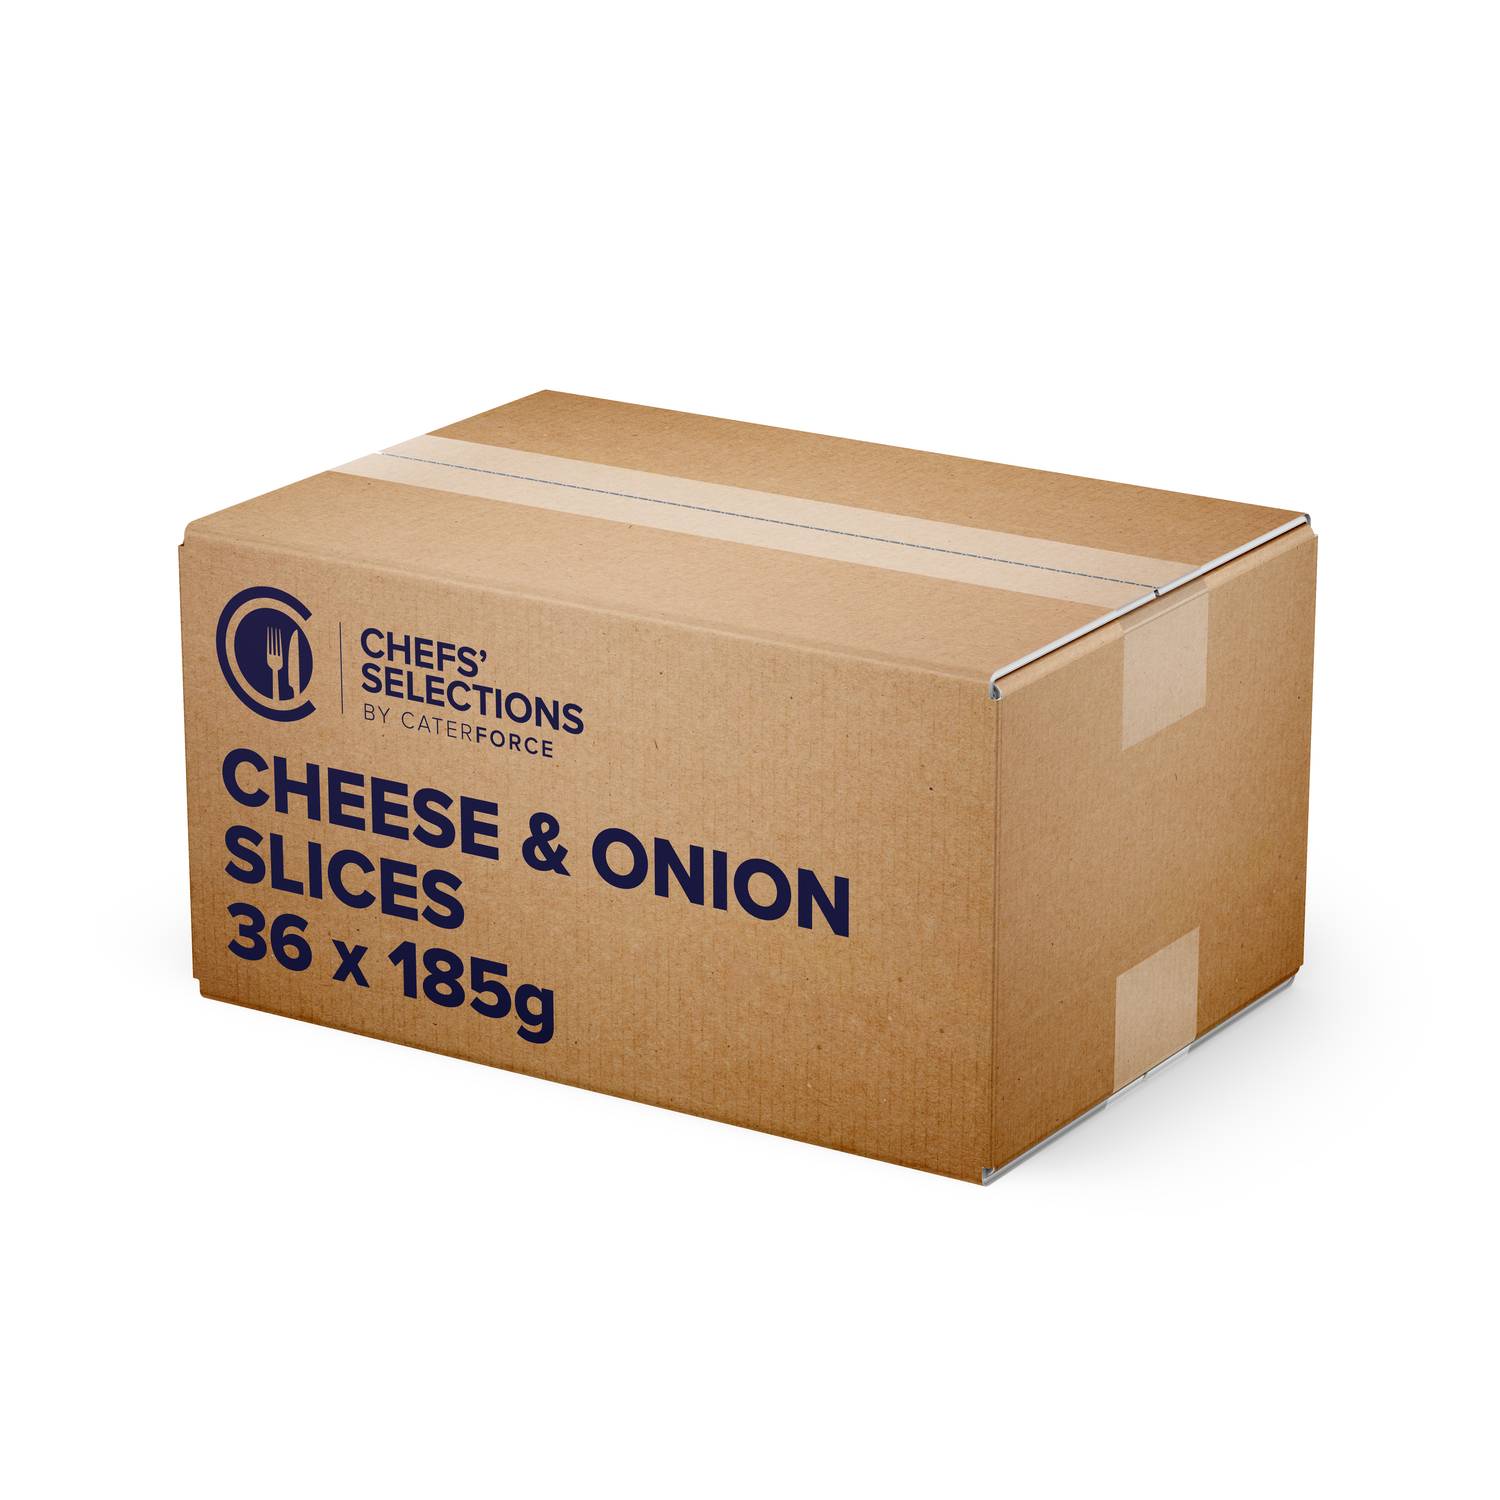 Chefs’ Selections Cheese & Onion Slice (36 x 185g)